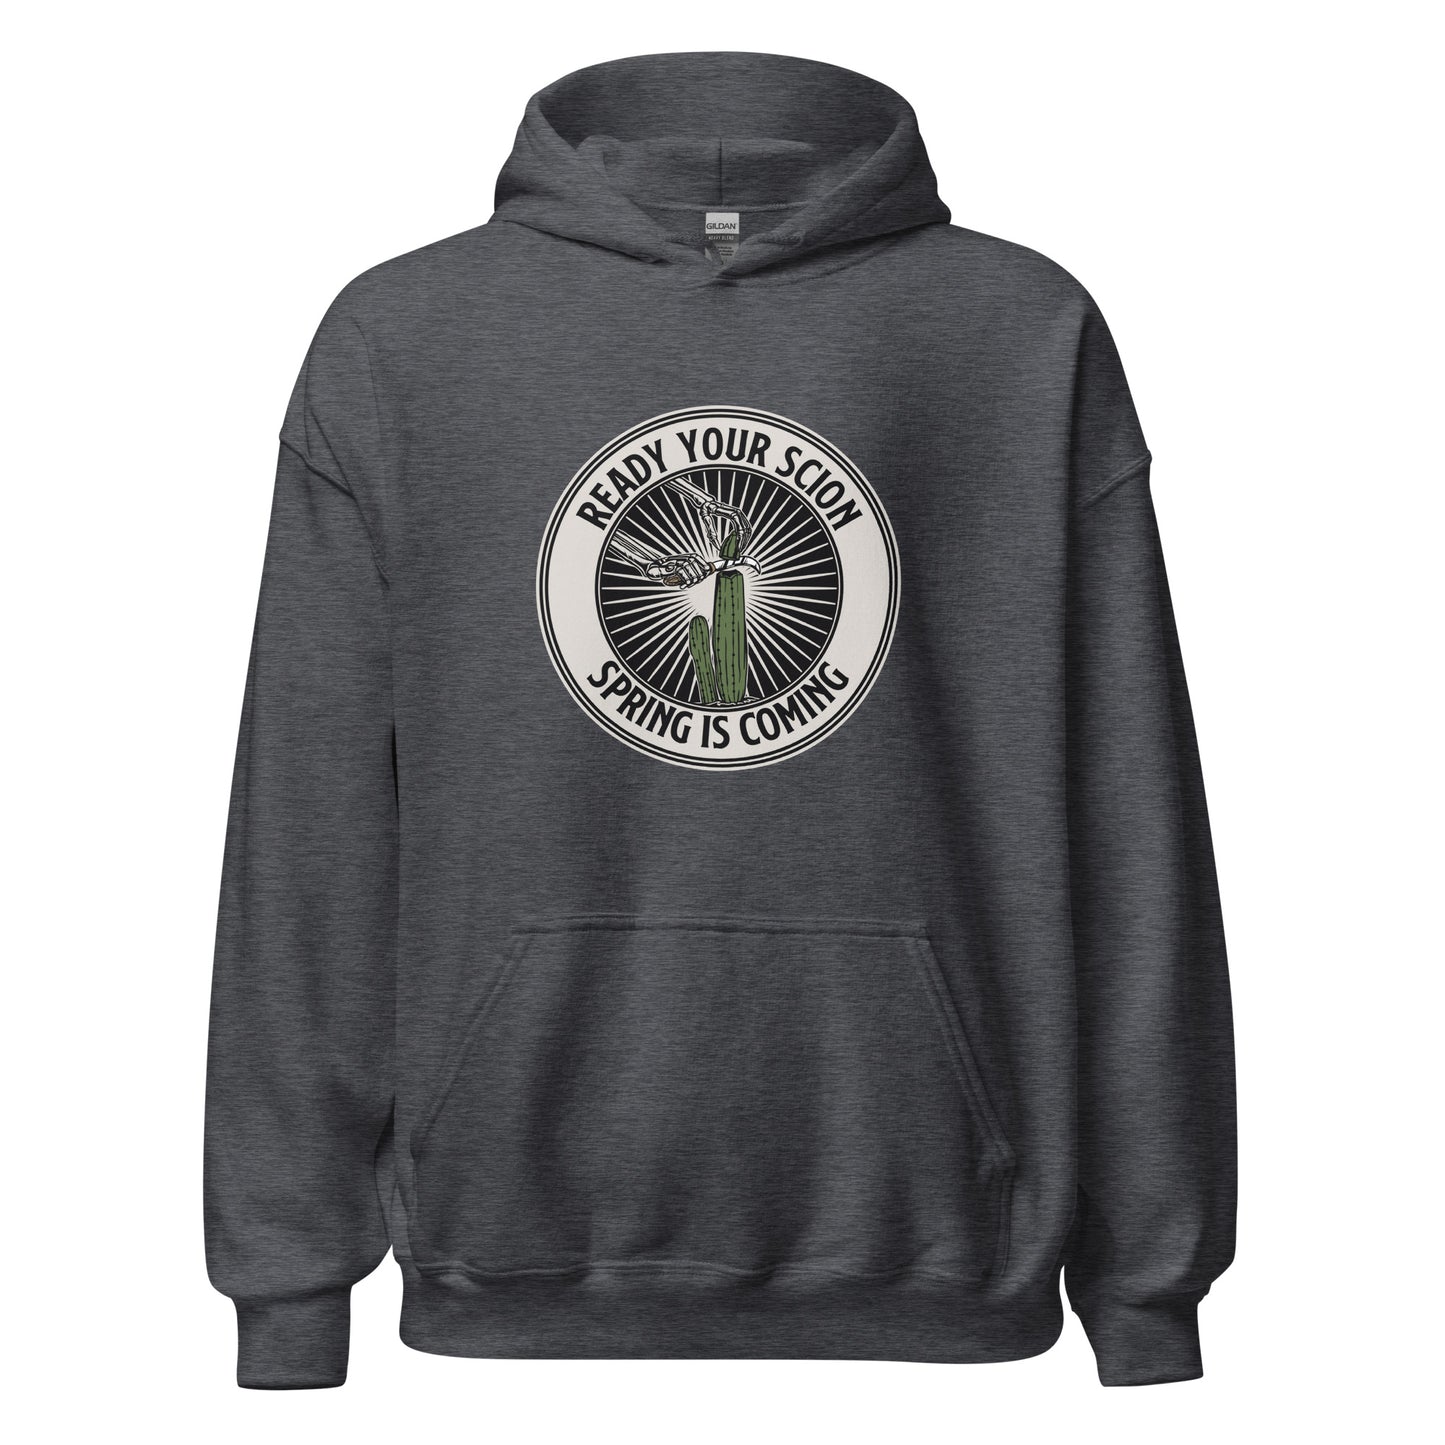 Ready Your Scion unisex hoodie